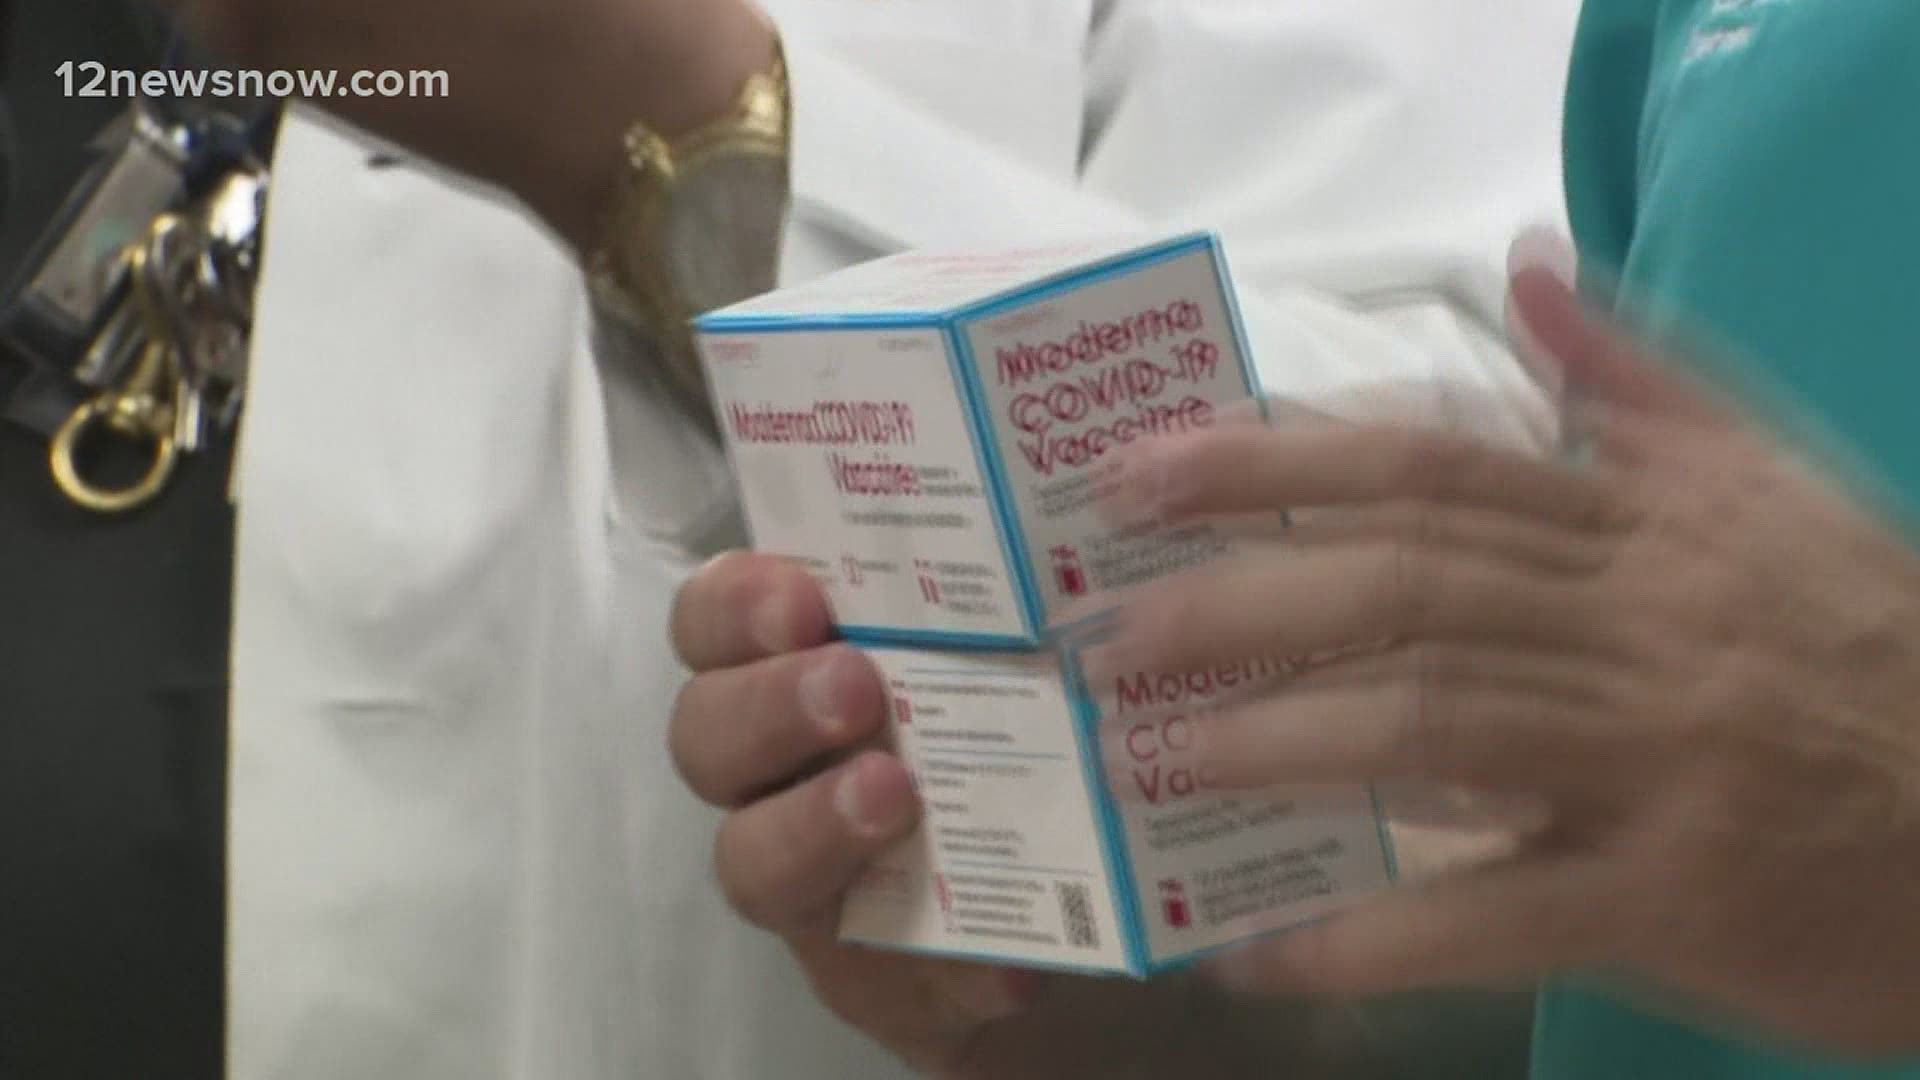 25 hospitals in Texas received the Moderna vaccine Tuesday, according to the state.